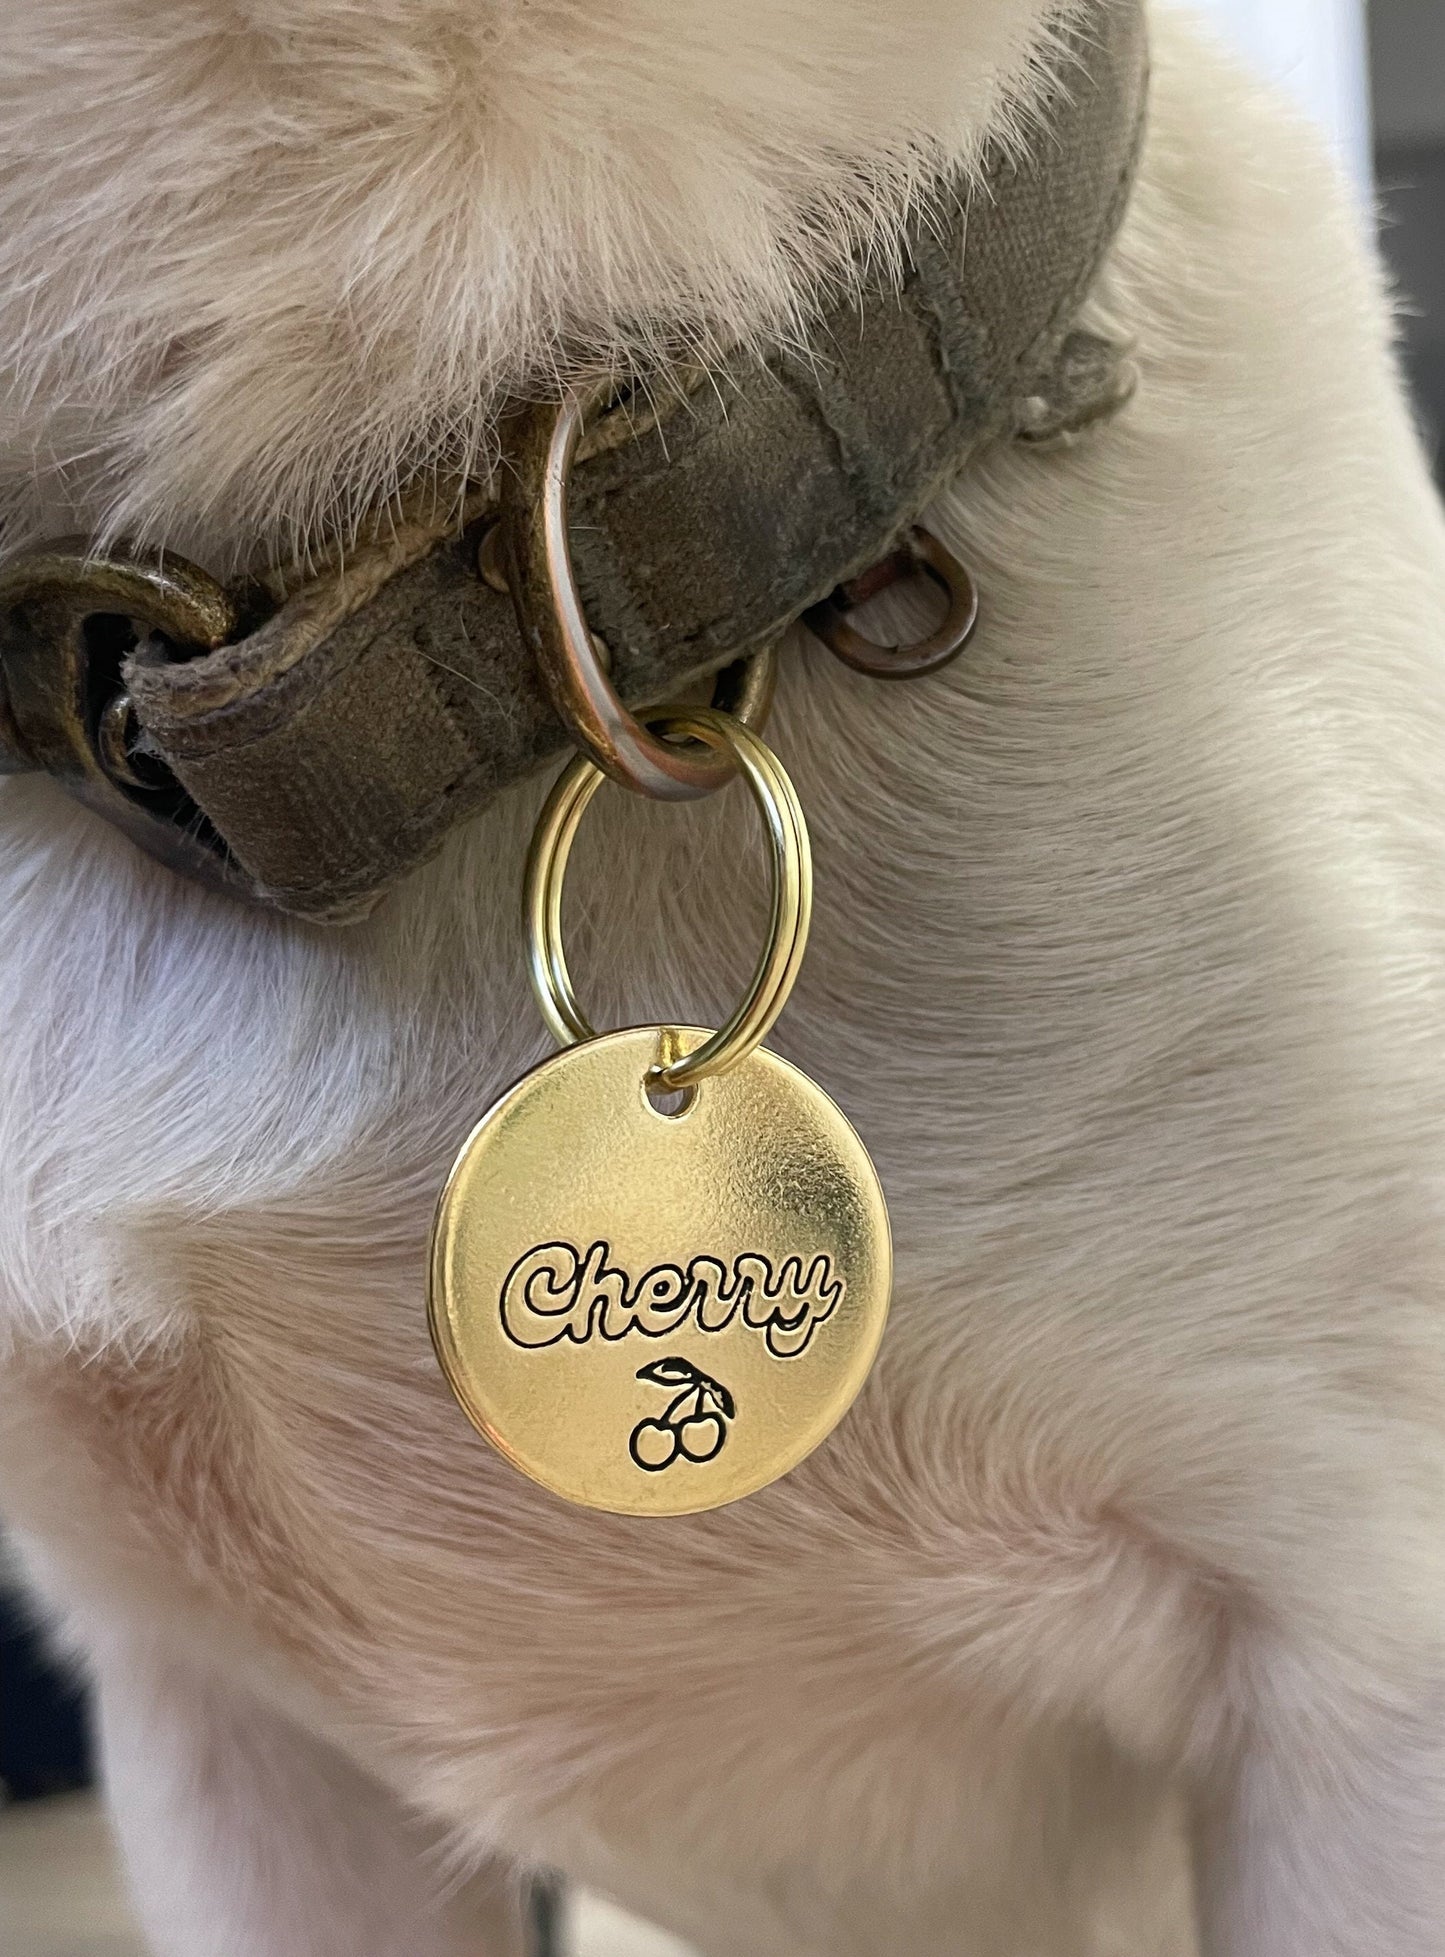 Personalized Dog Tag - Cherry Design Engraved Dog Tag - Cat ID Tag - Dog Collar Tag - Custom Dog Tag - Pet ID Tag - Pet Name Tag - Cherry Dog Tag - Dog Gear - Dog Accessories - Pet Accessories - Fruit Emoji